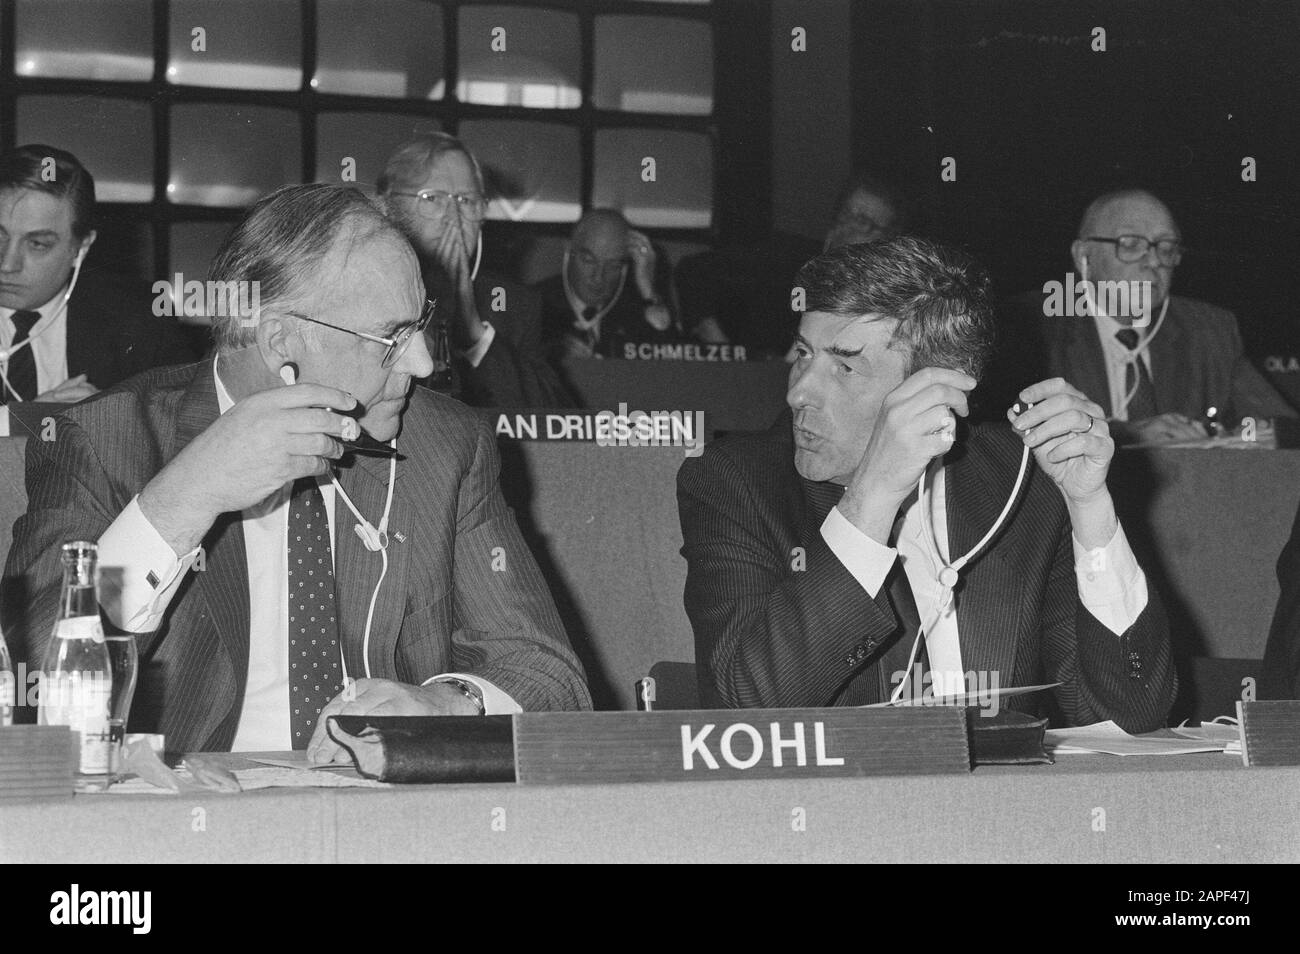 Congress of the European People's Party 1986 in The Hague Description: Chancellor Kohl of West Germany in conversation with Prime Minister Lubbers Annotation: marginals negative strip: 27en 28 Kohl Date: April 12, 1986 Location: The Hague, Zuid-Holland Keywords: conferences, economics, minister-presidents Personal name: Kohl, Helmut, Lubbers, Ruud Stock Photo